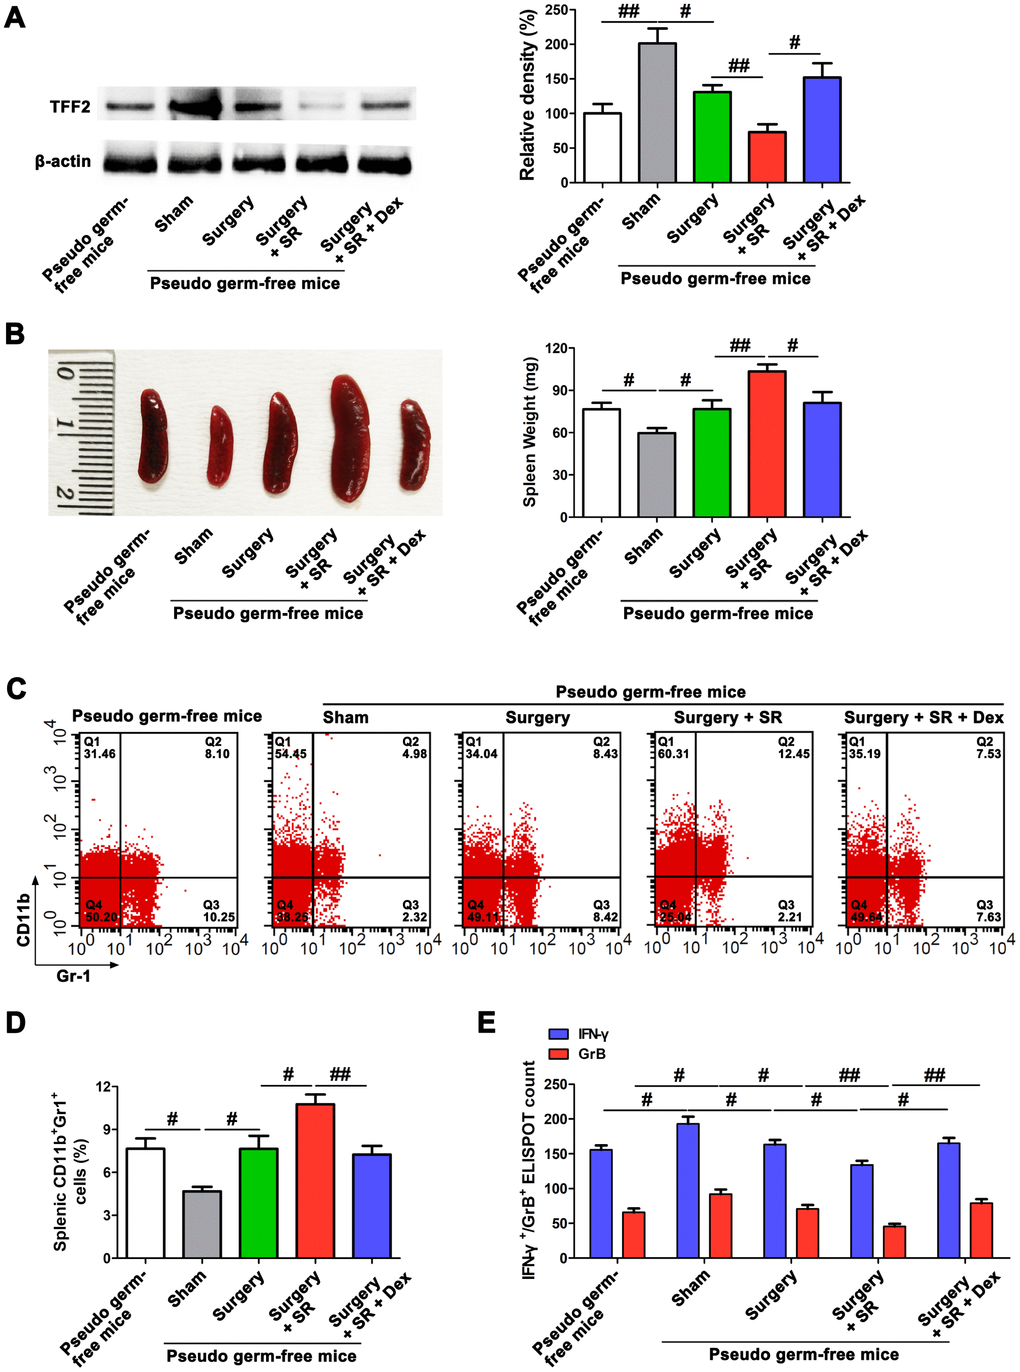 Dexmedetomidine (Dex) attenuated postoperative sleep-restriction (SR)-induced decrease in splenic trefoil factor 2 (TFF2) expression, increase in myeloid-derived suppressor cells (MDSCs) expansion and decrease in splenic CD8+ cells activity via improving gut microbiota disturbance. (A) Western blotting analysis of splenic TFF2 expression in sham-operated mice and pseudo-germ-free mouse received fecal microbiota transplantation (FMT). (B) Spleen weight in sham-operated mice and pseudo-germ-free mouse received FMT. (C, D) Flow cytometry analysis of spleen for CD11b+ Gr-1+ MDSCs in sham-operated mice and pseudo-germ-free mouse received FMT. (E) The enzyme-linked immunospot (ELISPOT) assay of the levels of interferon-γ (IFN-γ) and Granzyme B (GrB) in splenic CD8+ T cells from sham-operated mice and pseudo-germ-free mouse received FMT. All data represent mean ± SEM, n = 5; #P ##P 